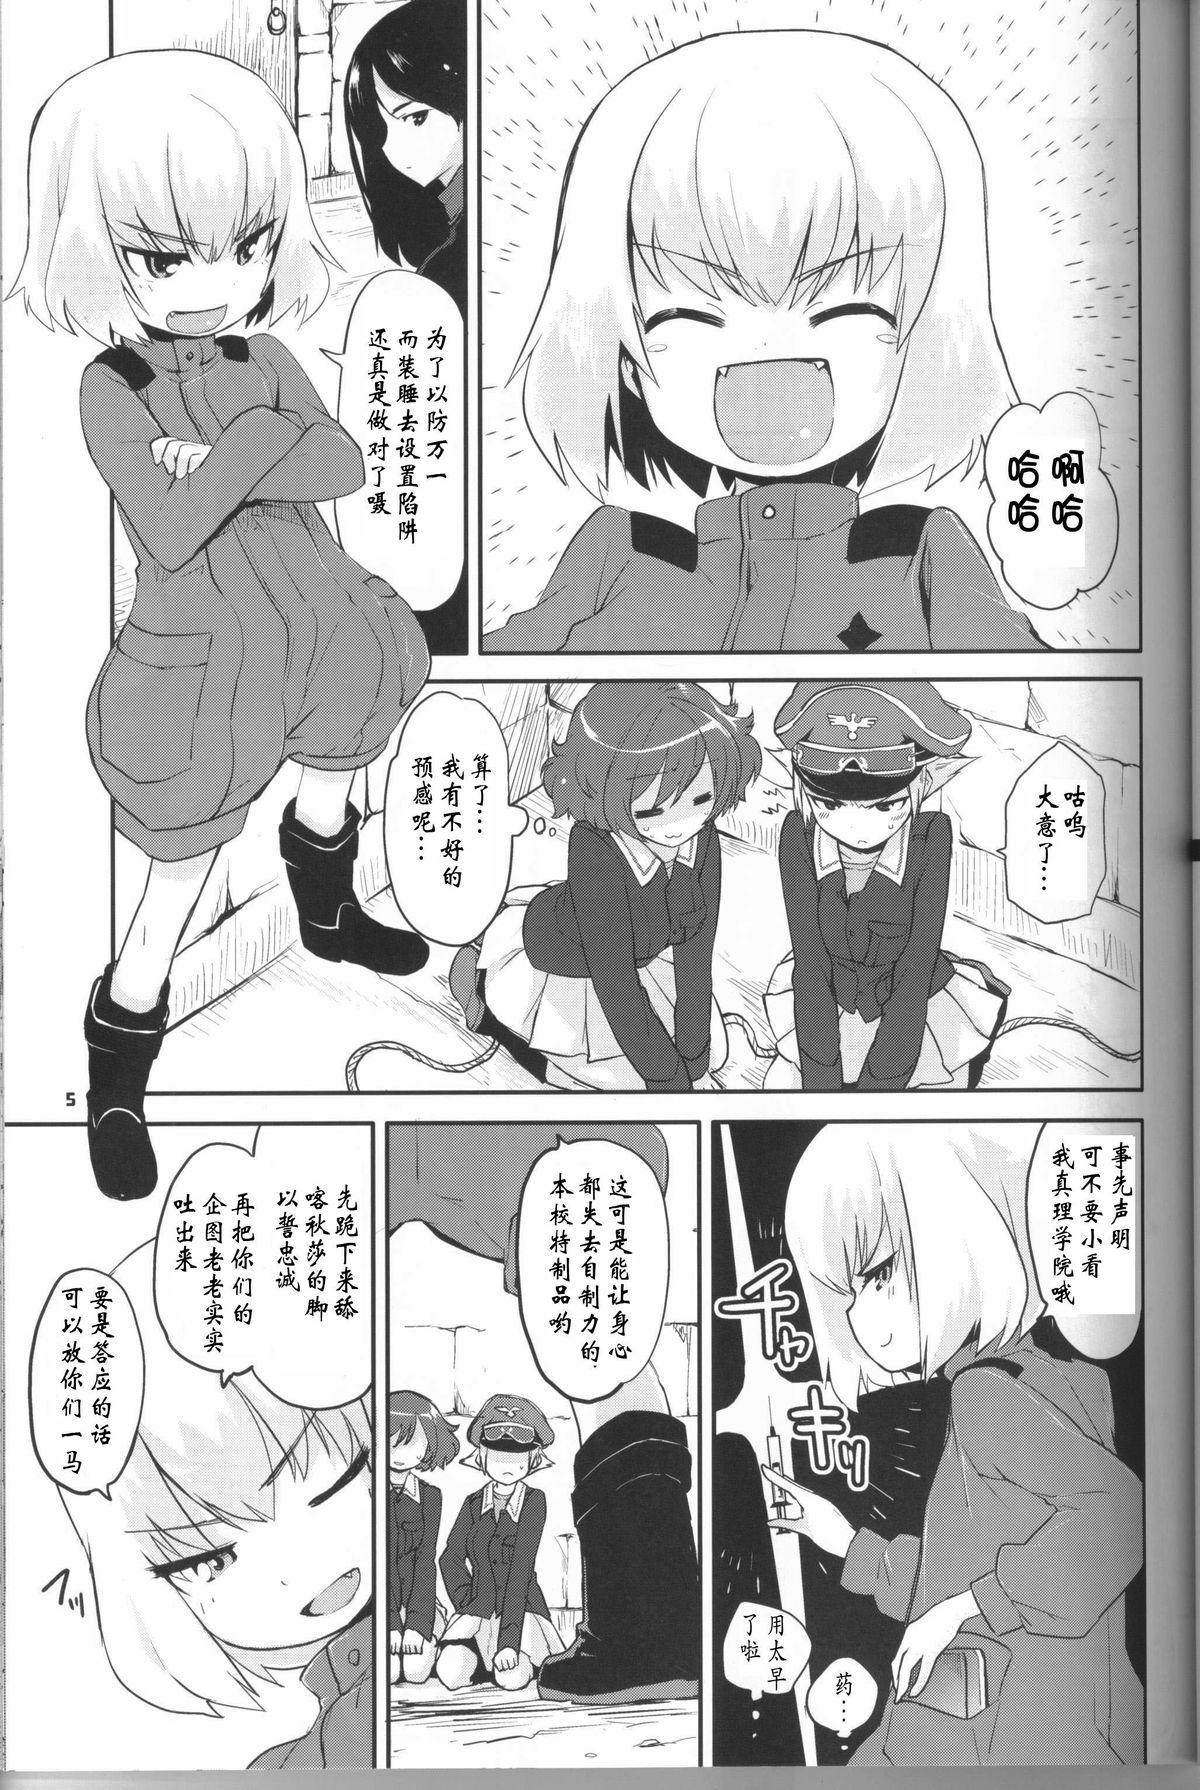 Anal The General Frost Has Come! - Girls und panzer Amateur Blowjob - Page 4